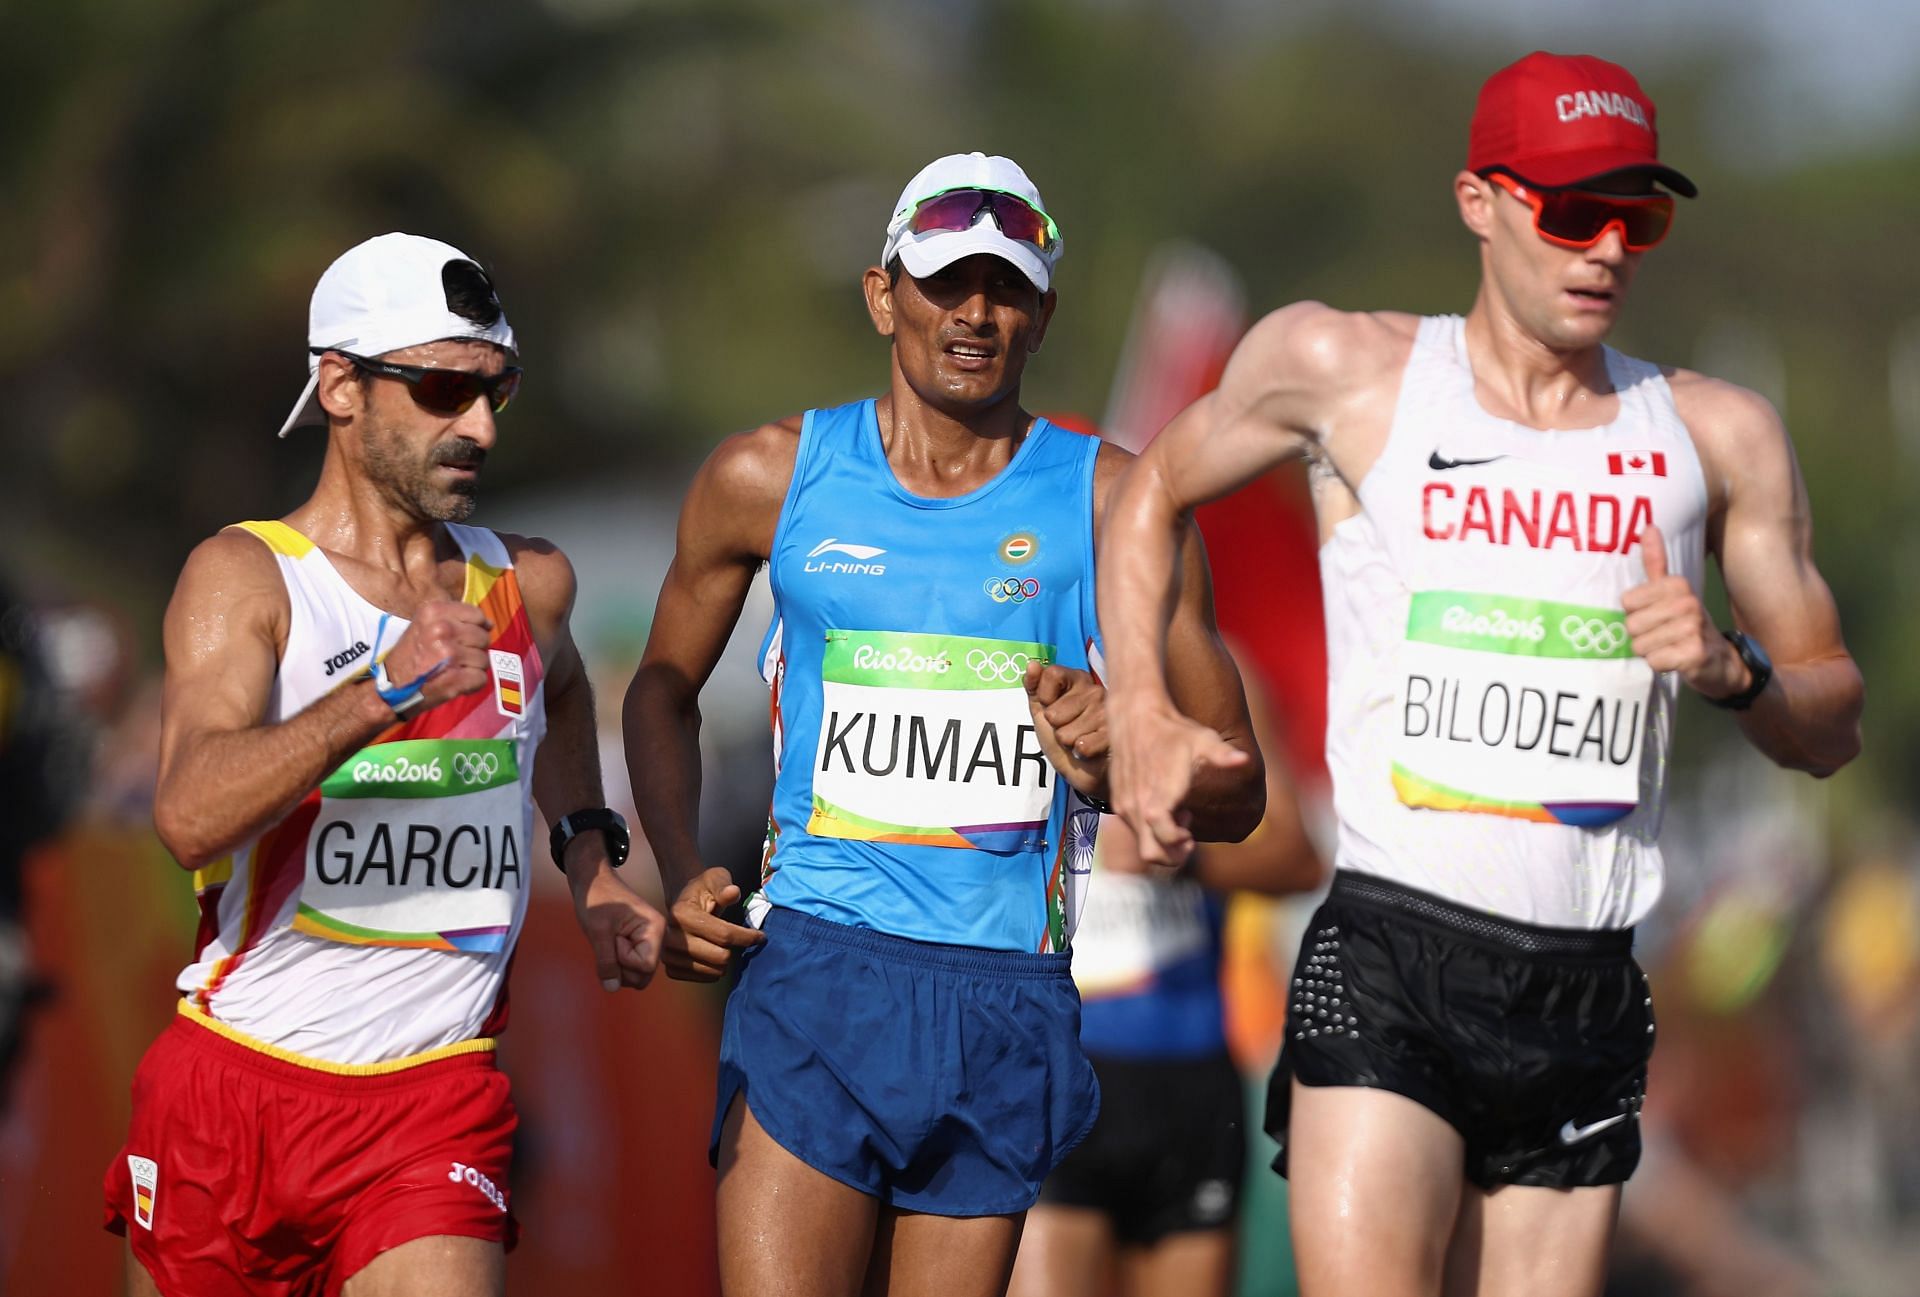 Sandeep Kumar (in blue) in action at the Tokyo Olympics (Image courtesy: Getty Images)